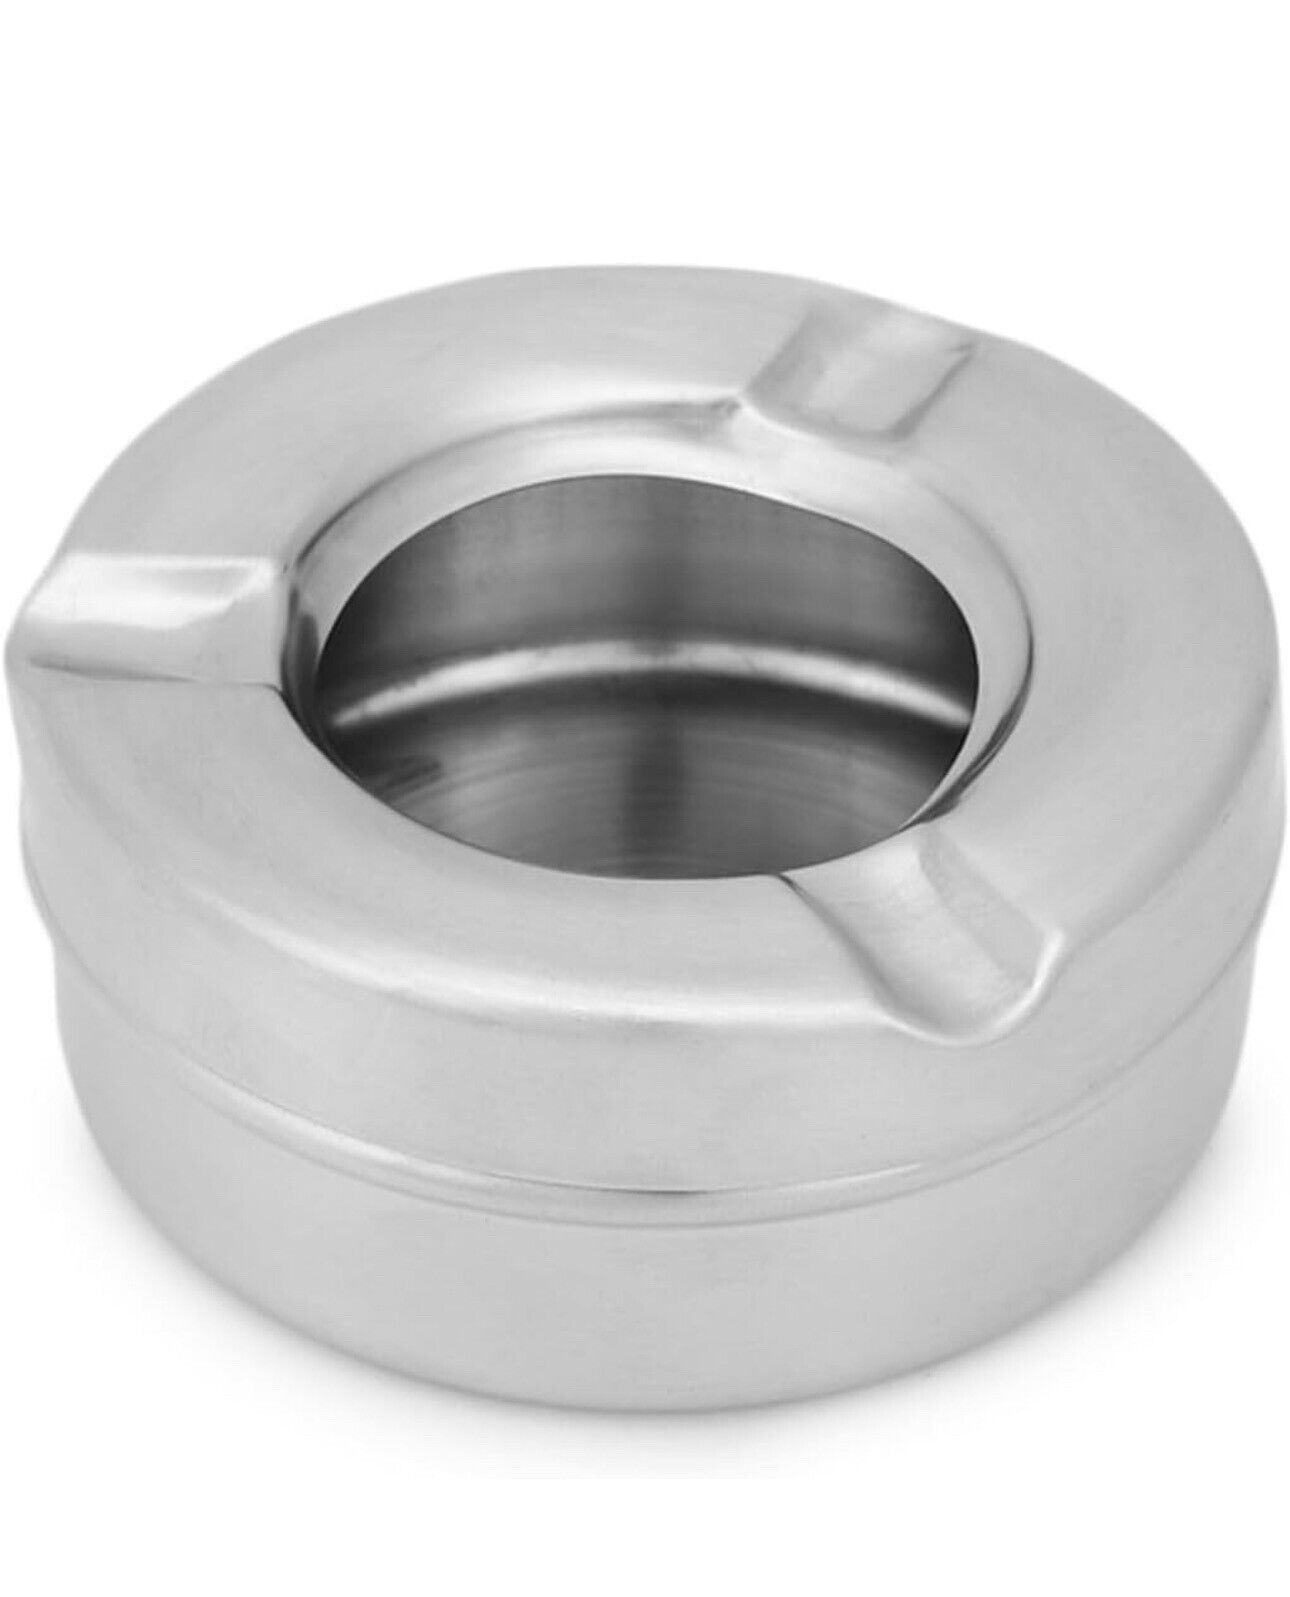 Stainless Steel Lid Ash Tray